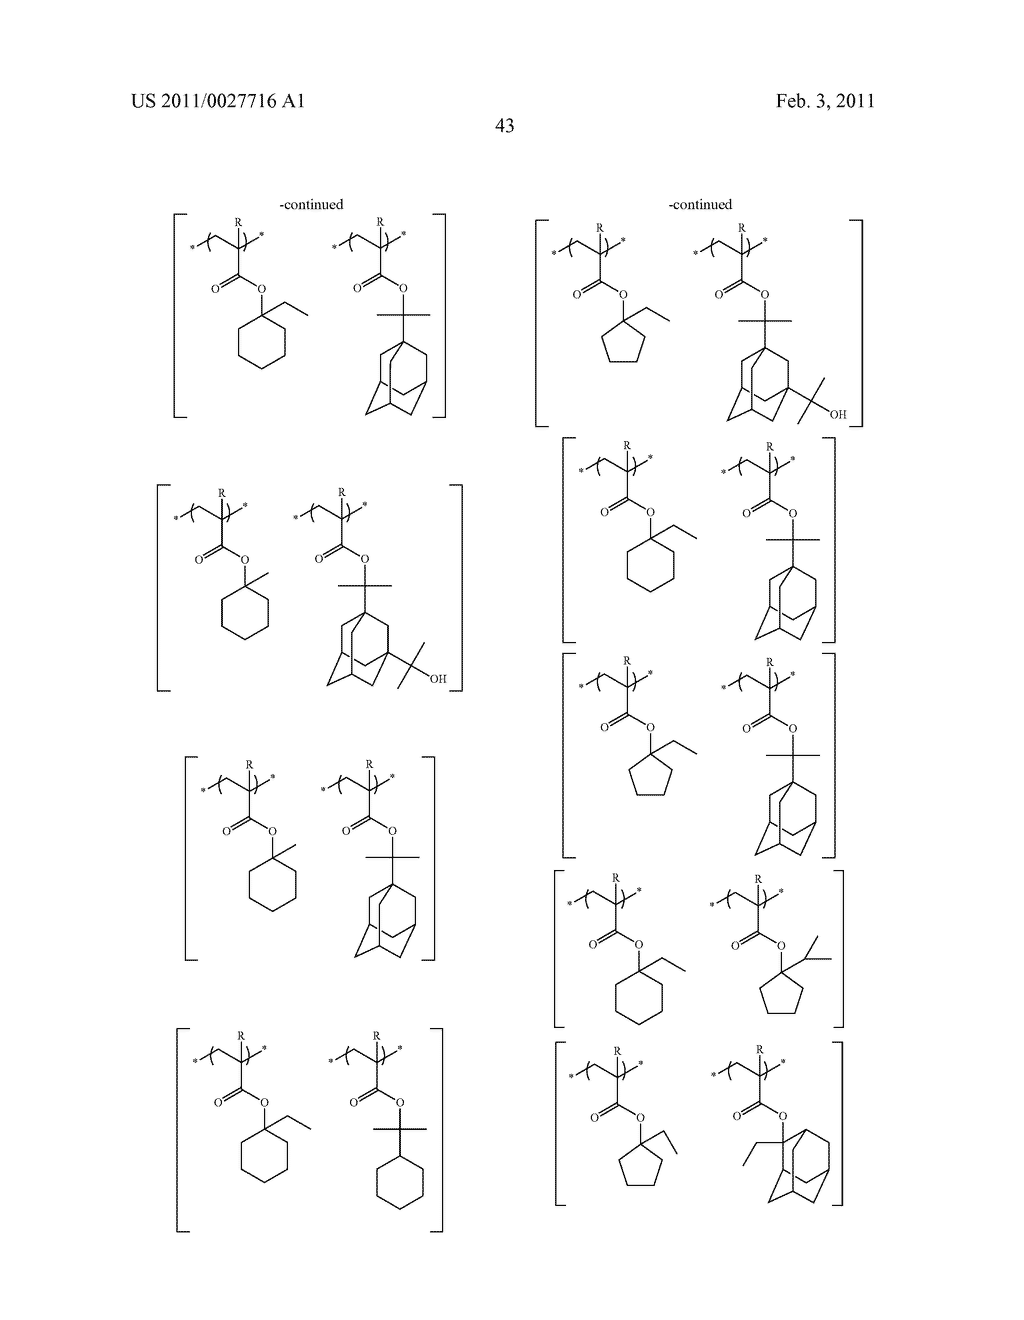 ACTINIC-RAY- OR RADIATION-SENSITIVE RESIN COMPOSITION, COMPOUND AND METHOD OF FORMING PATTERN USING THE COMPOSITION - diagram, schematic, and image 46